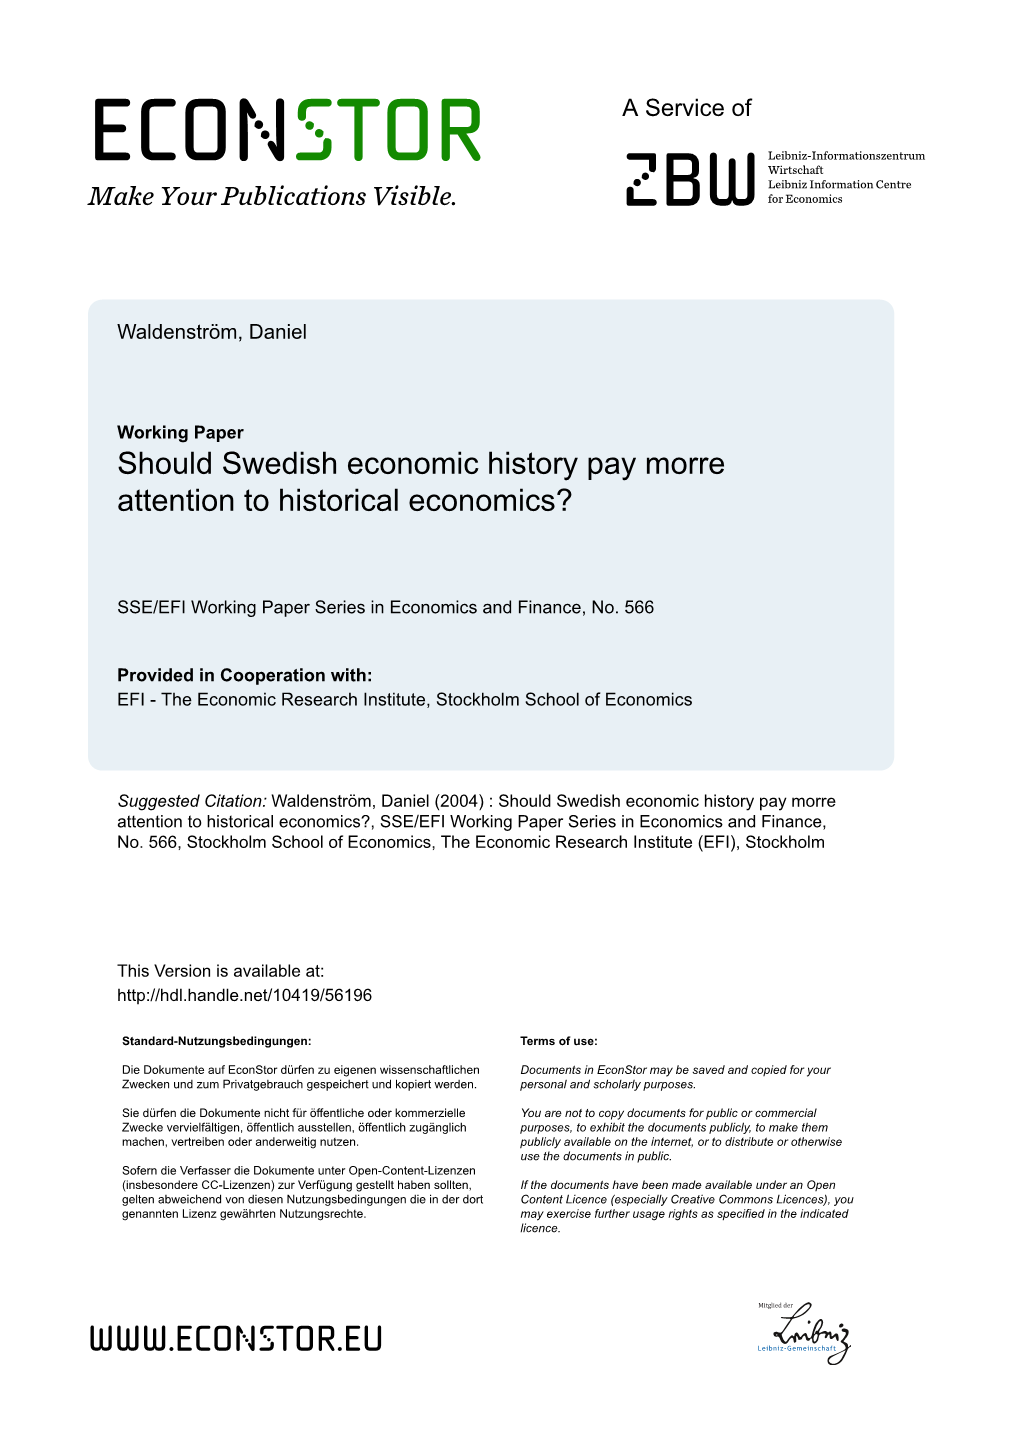 Should Swedish Economic History Pay Morre Attention to Historical Economics?